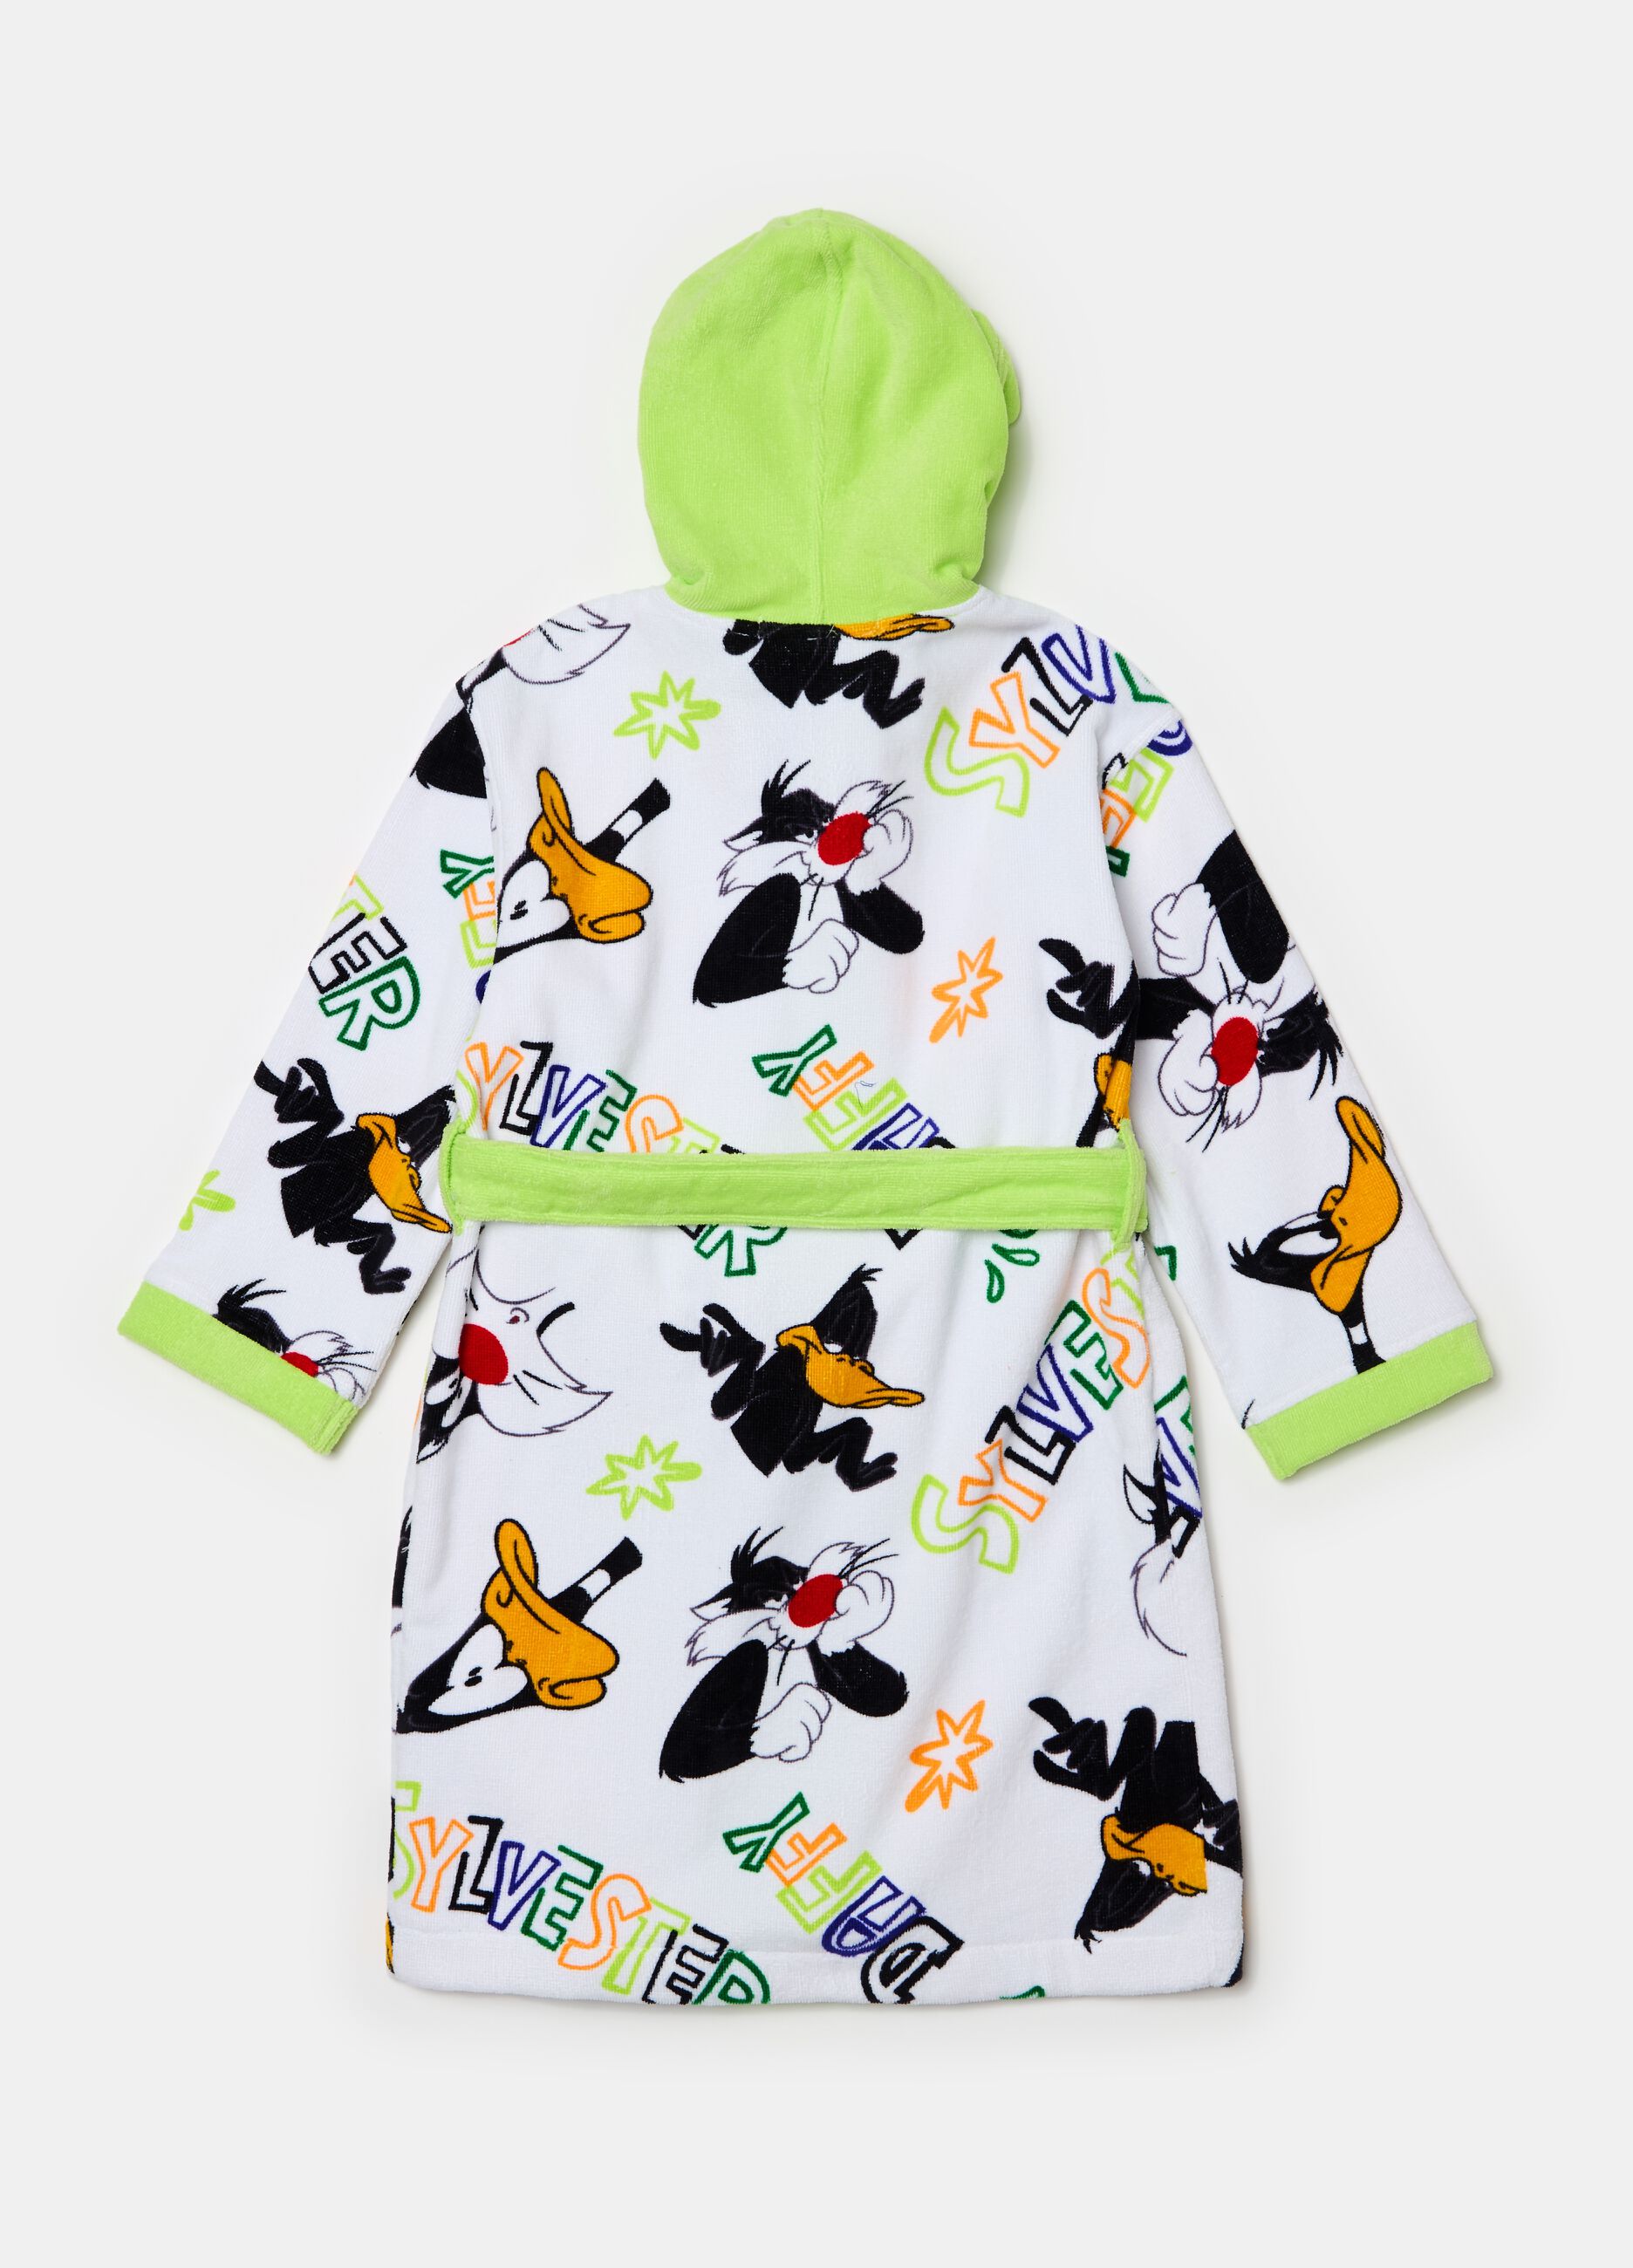 Bathrobe with Sylvester Cat and Daffy Duck